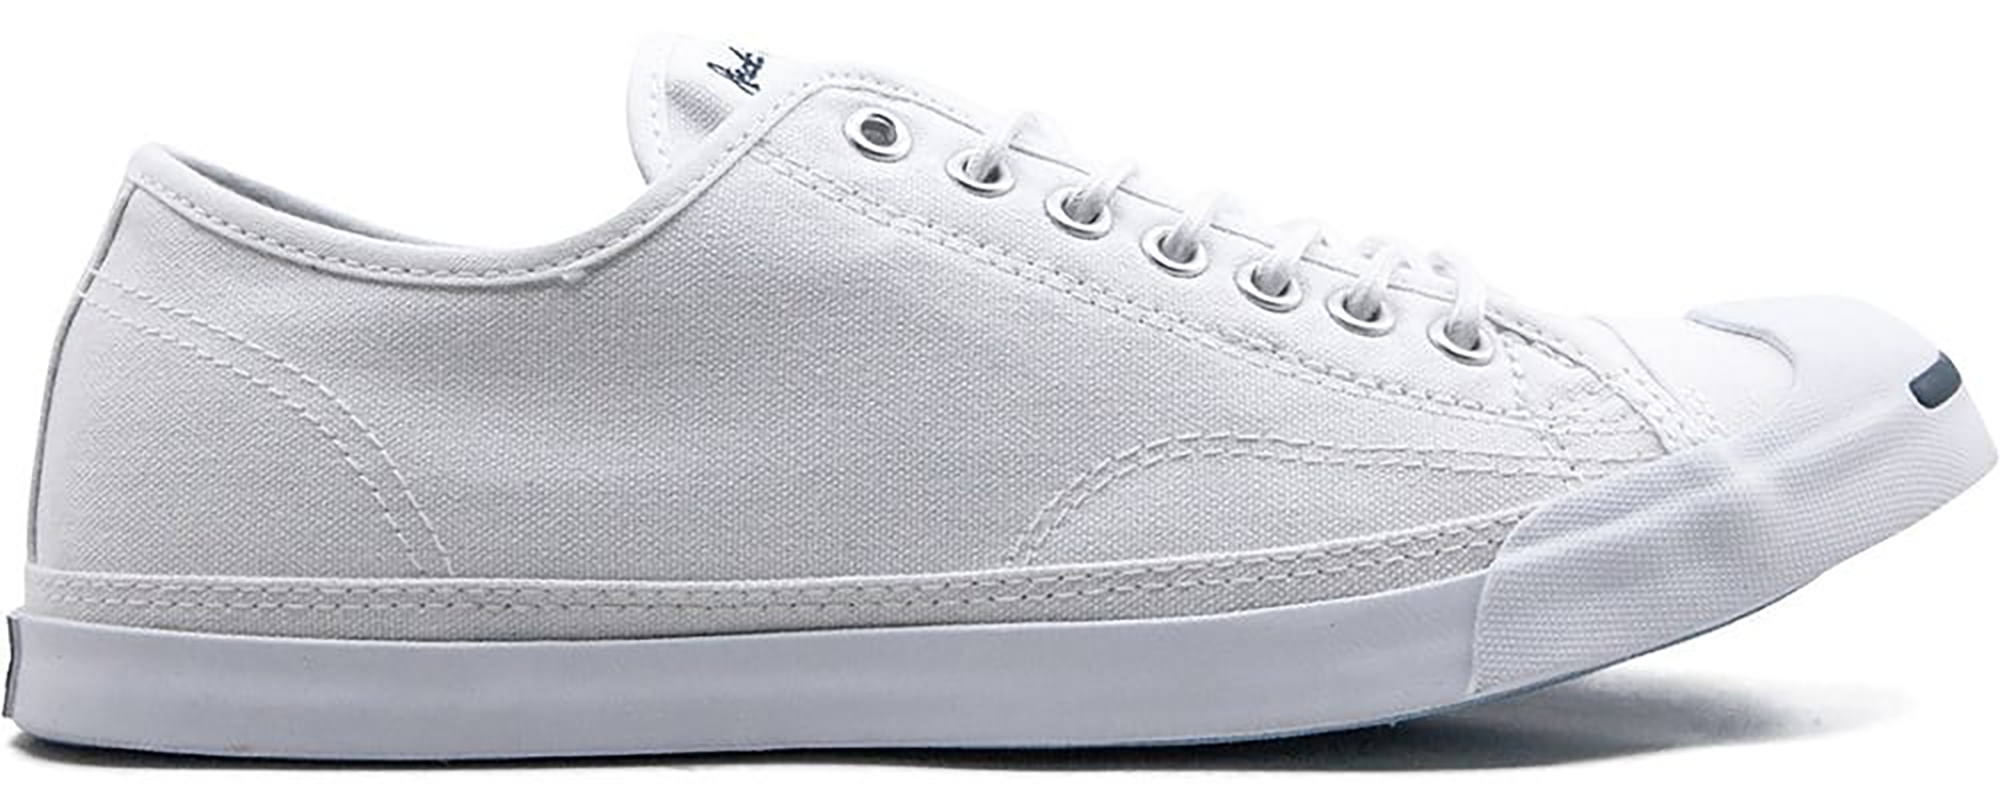 converse jack purcell slip